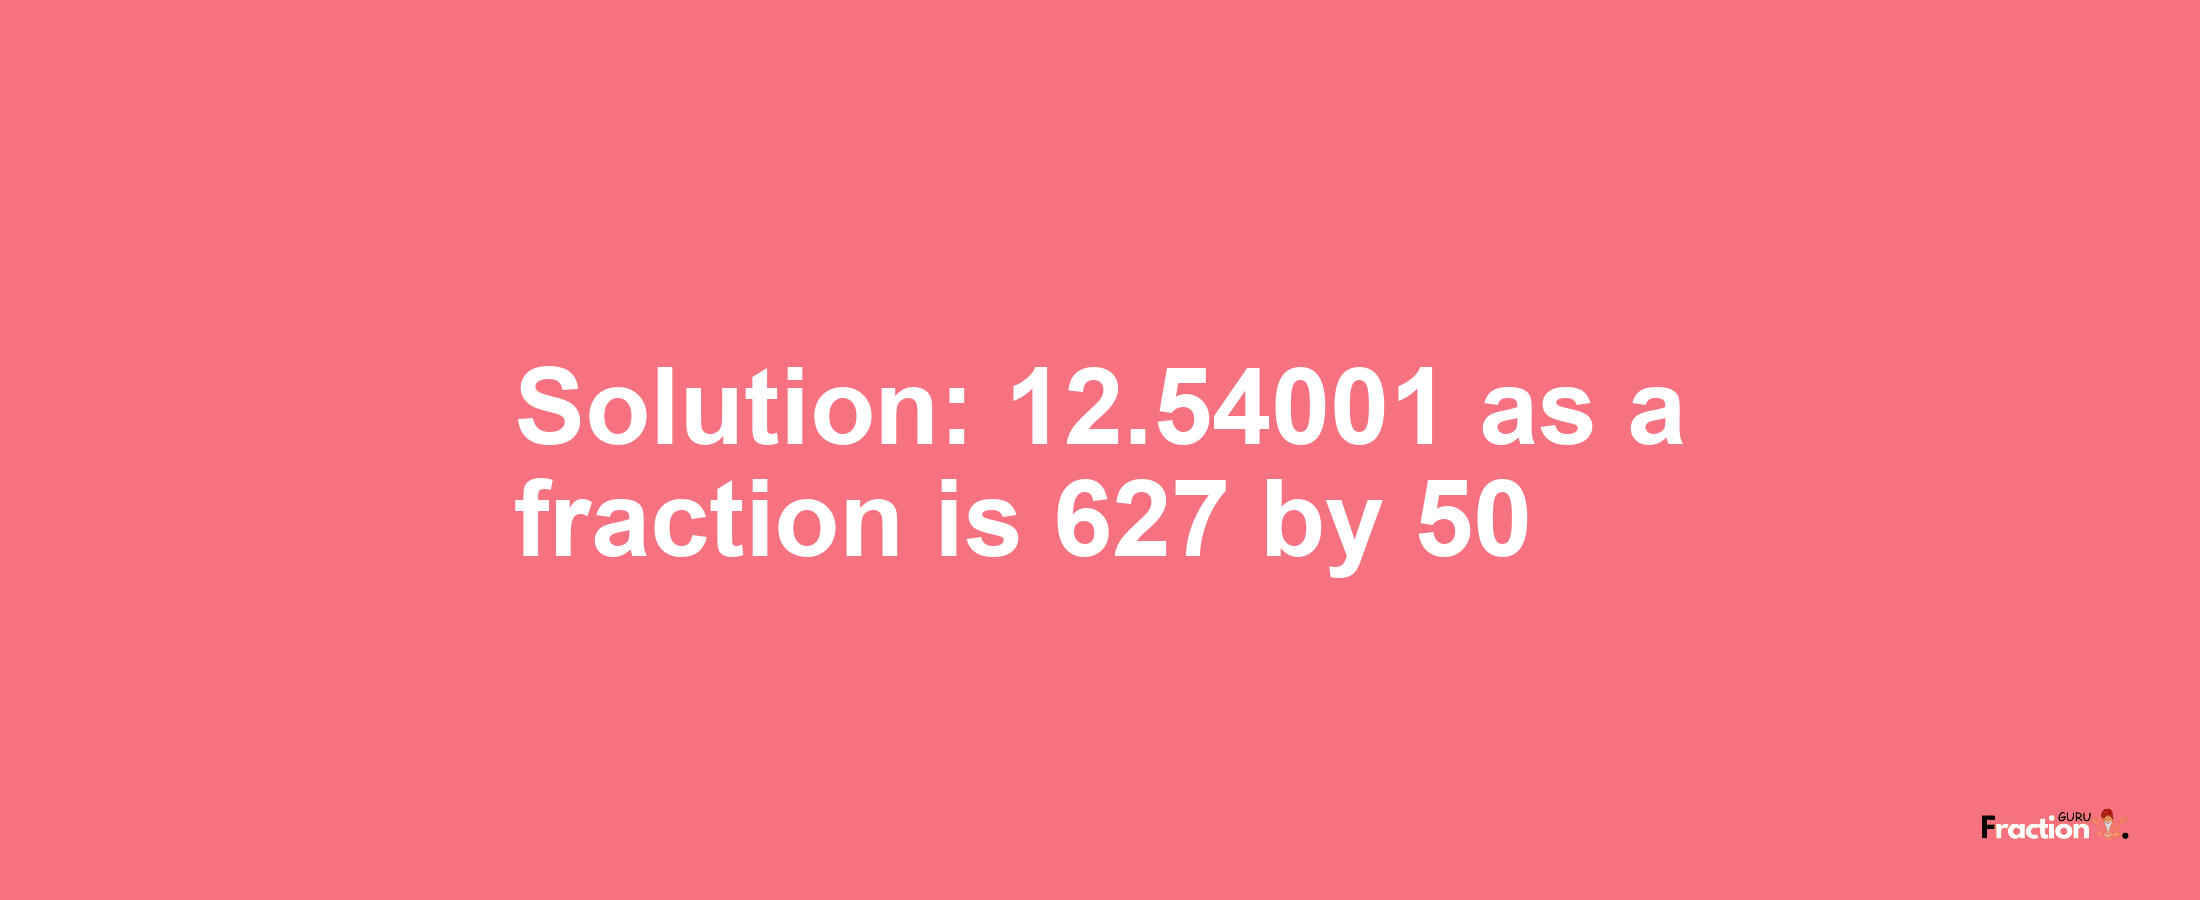 Solution:12.54001 as a fraction is 627/50